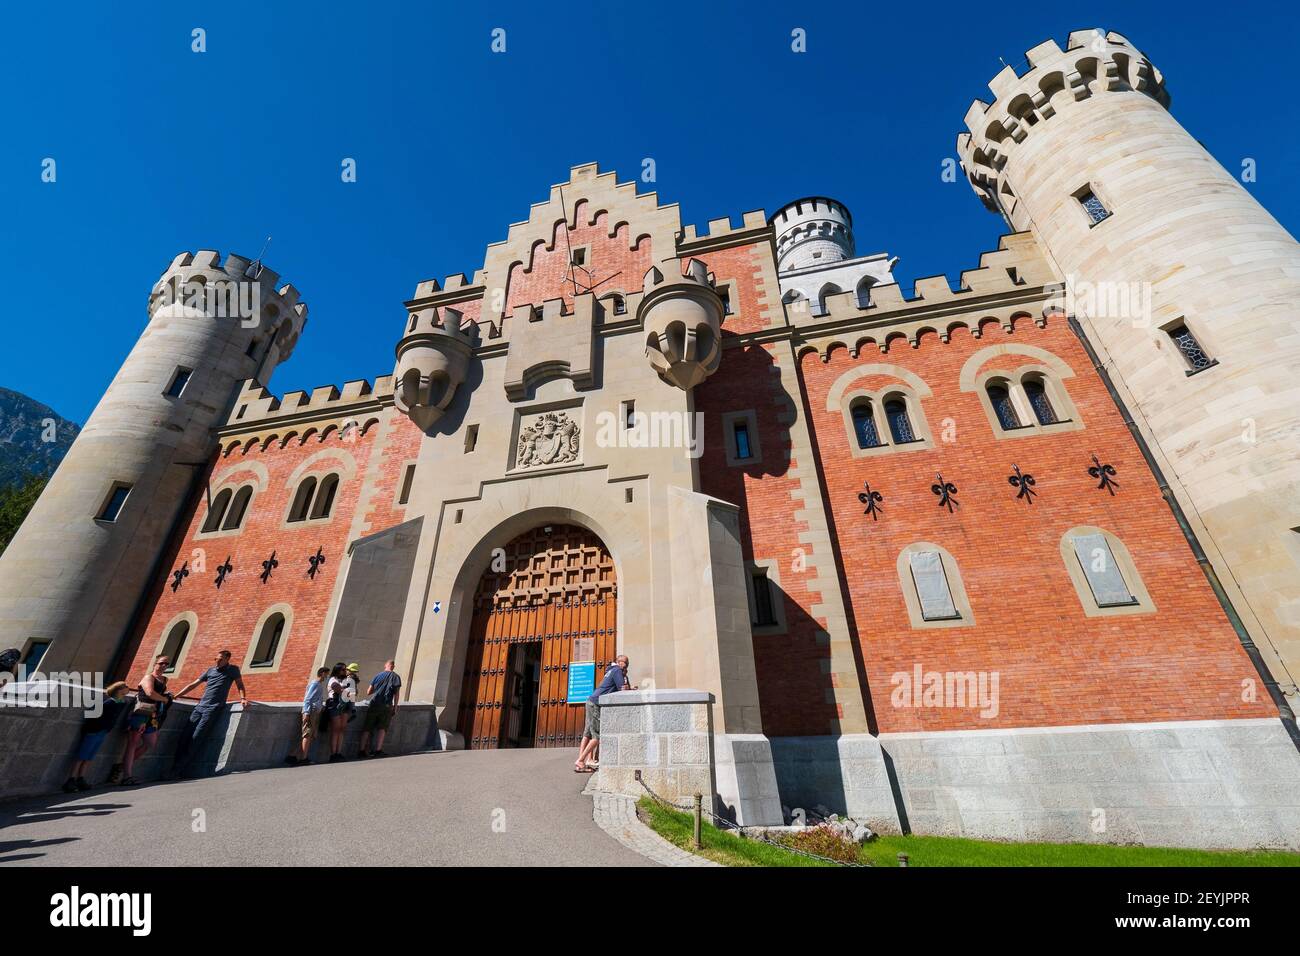 Low angle view of the portal of the famous 19th century romantic eclecticism palace Neuschwanstein Castle in Schwangau, Bavaria, Germany, Europe Stock Photo